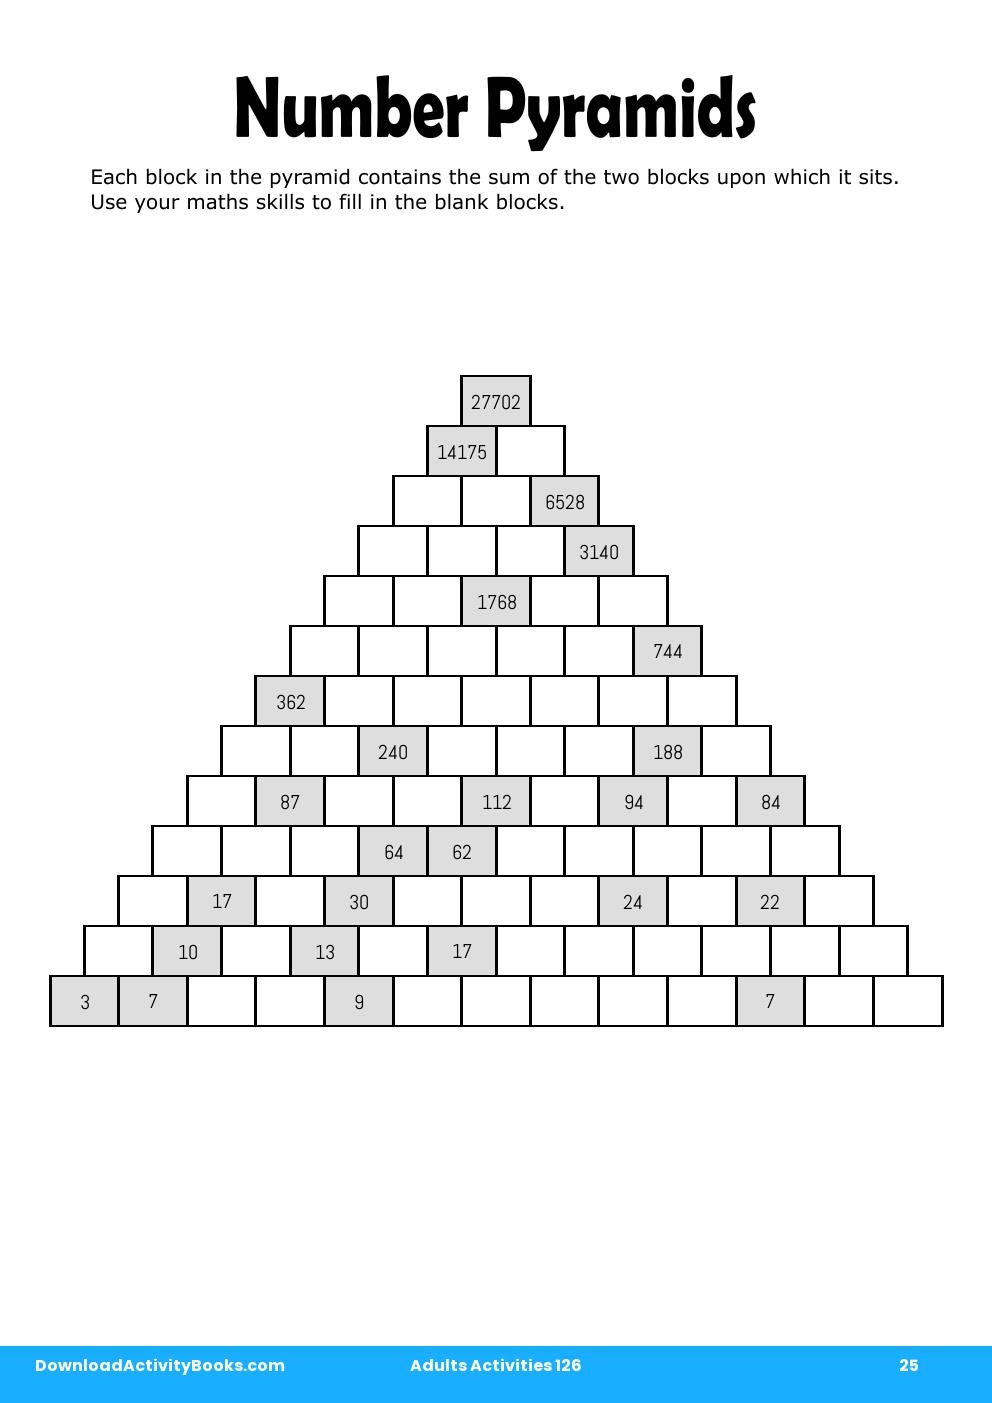 Number Pyramids in Adults Activities 126